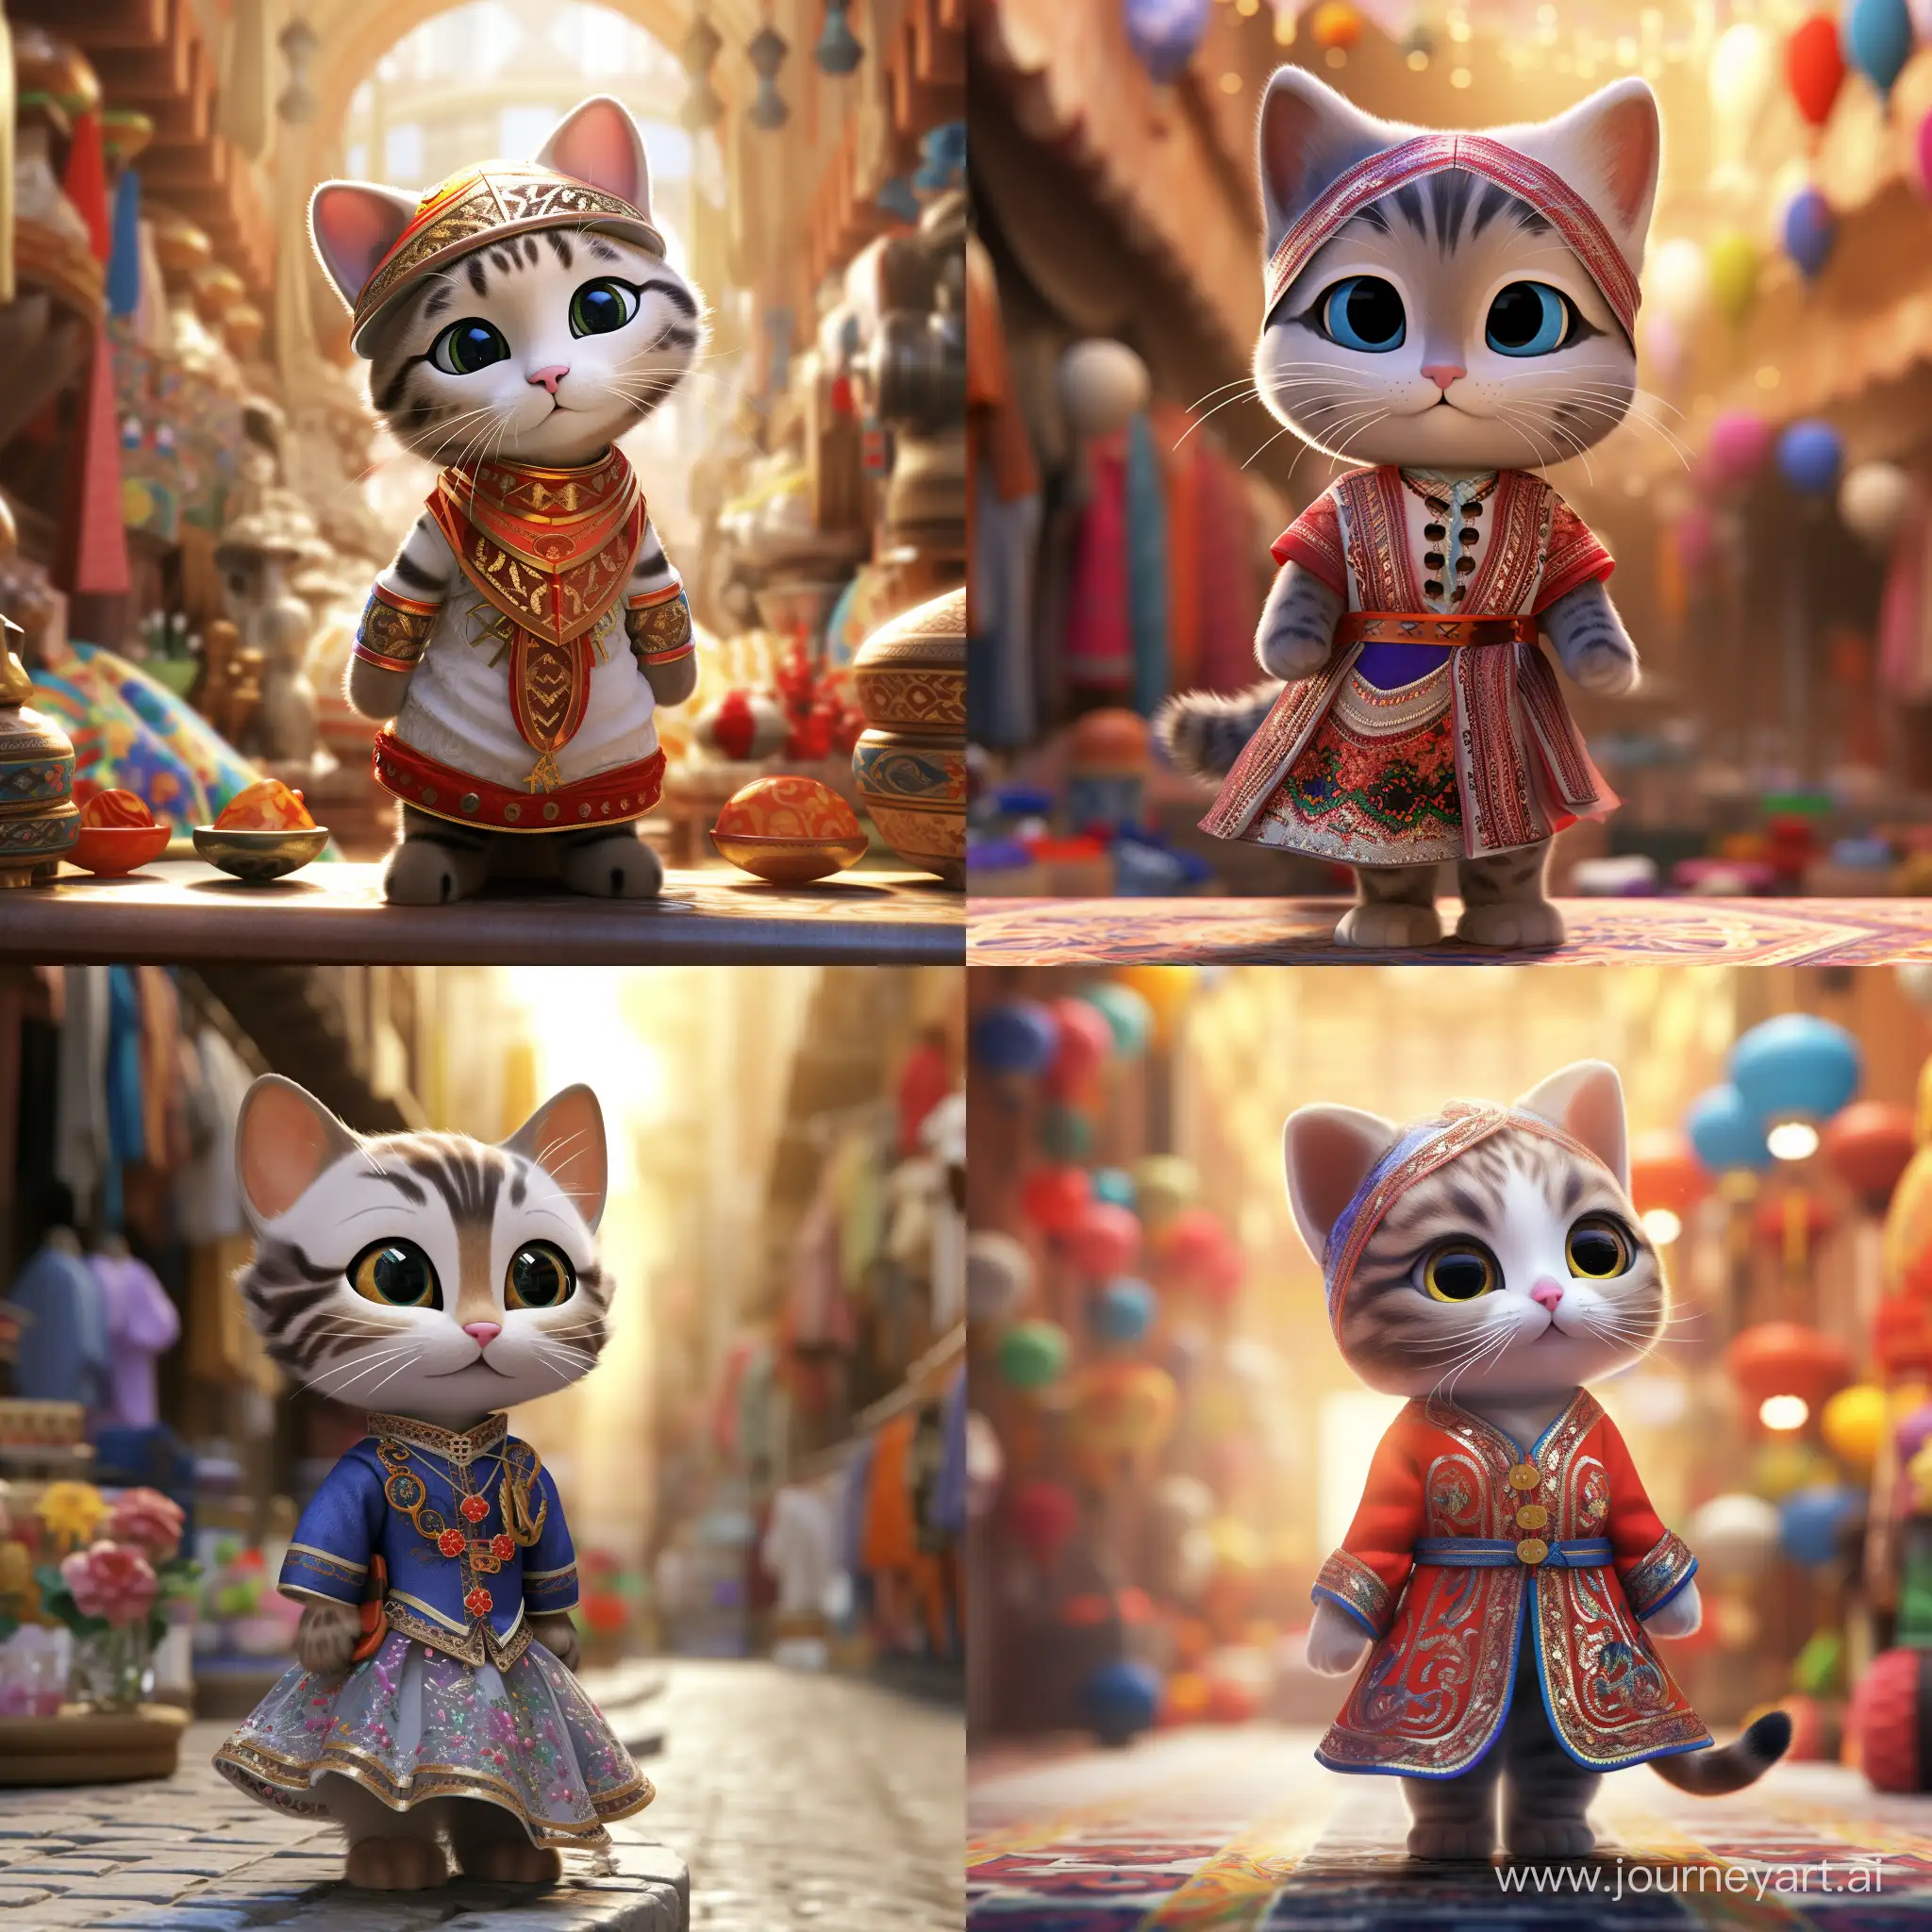 Cheerful-Disney-Cat-in-Vibrant-Moroccan-Costume-on-Traditional-Street